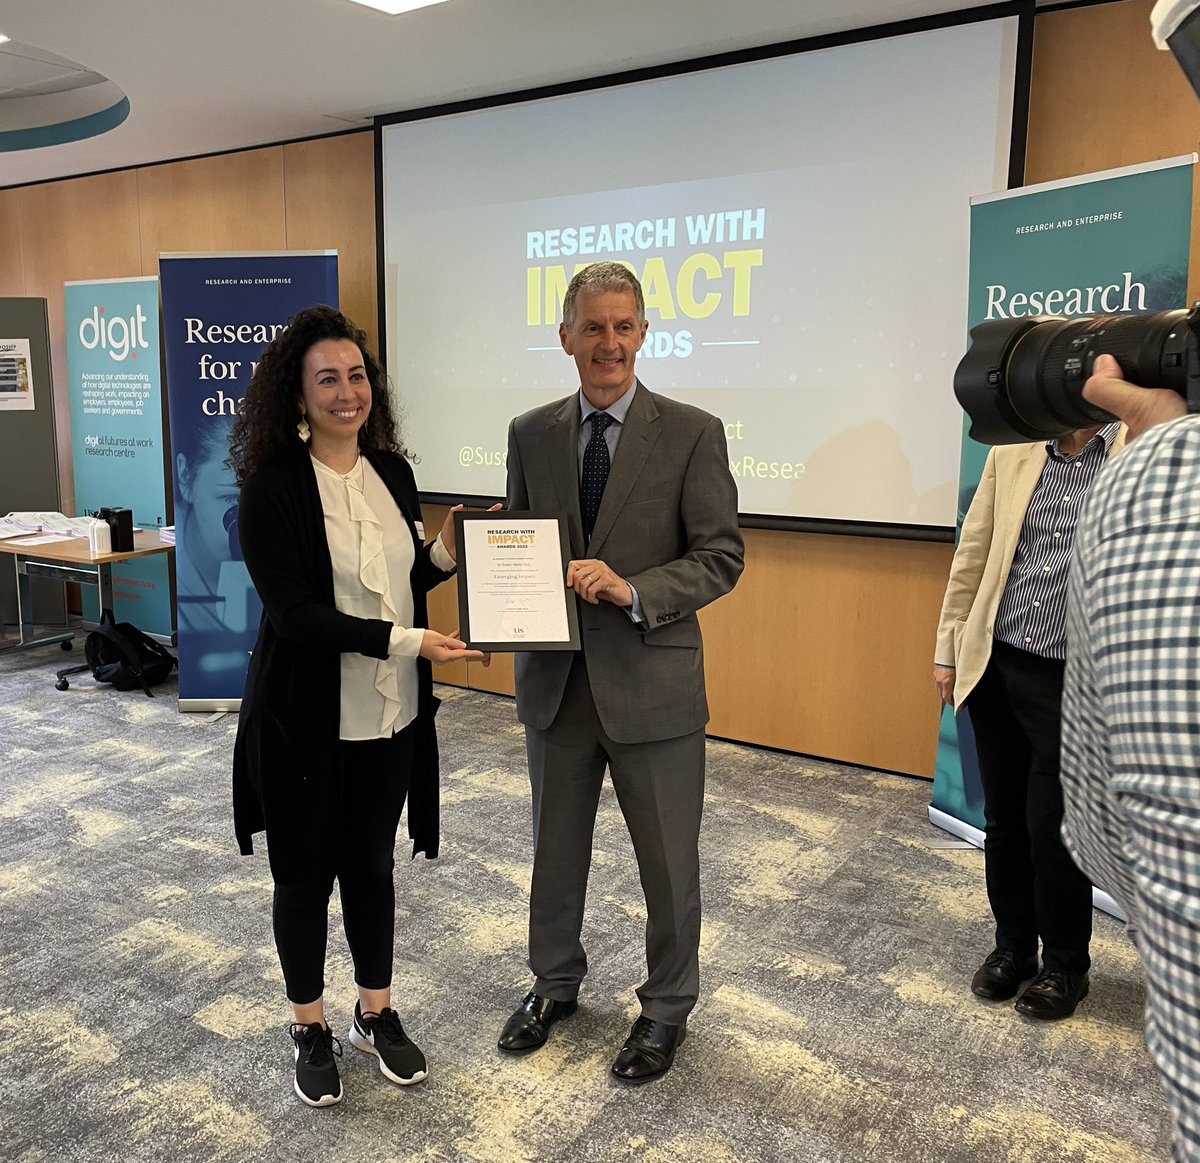 Three successes at @SussexUni Research with Impact awards for @Sussex_Psych : @melisulug’s work on allyship, @AliceESkelton’s work on colour perception, & Jane Oakhill’s work on reading comprehension - congratulations all!